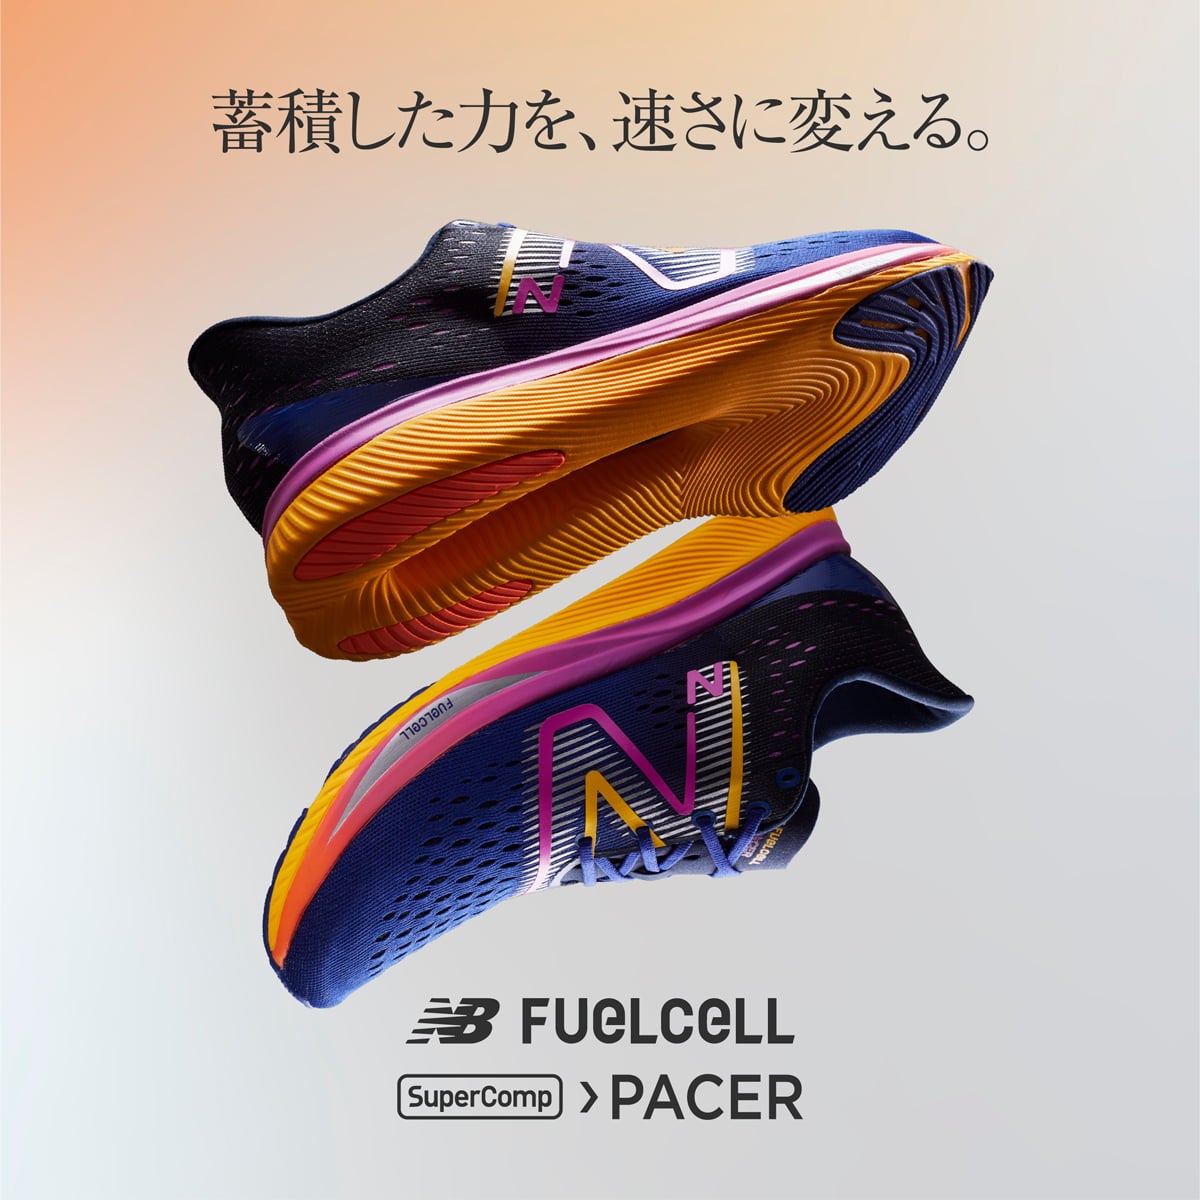 FuelCell SuperComp PACER 力を速さに変える新しいテクノロジー・ENERGY ARCを搭載。スピードを重視したモデル『FuelCell SuperComp PACER』。